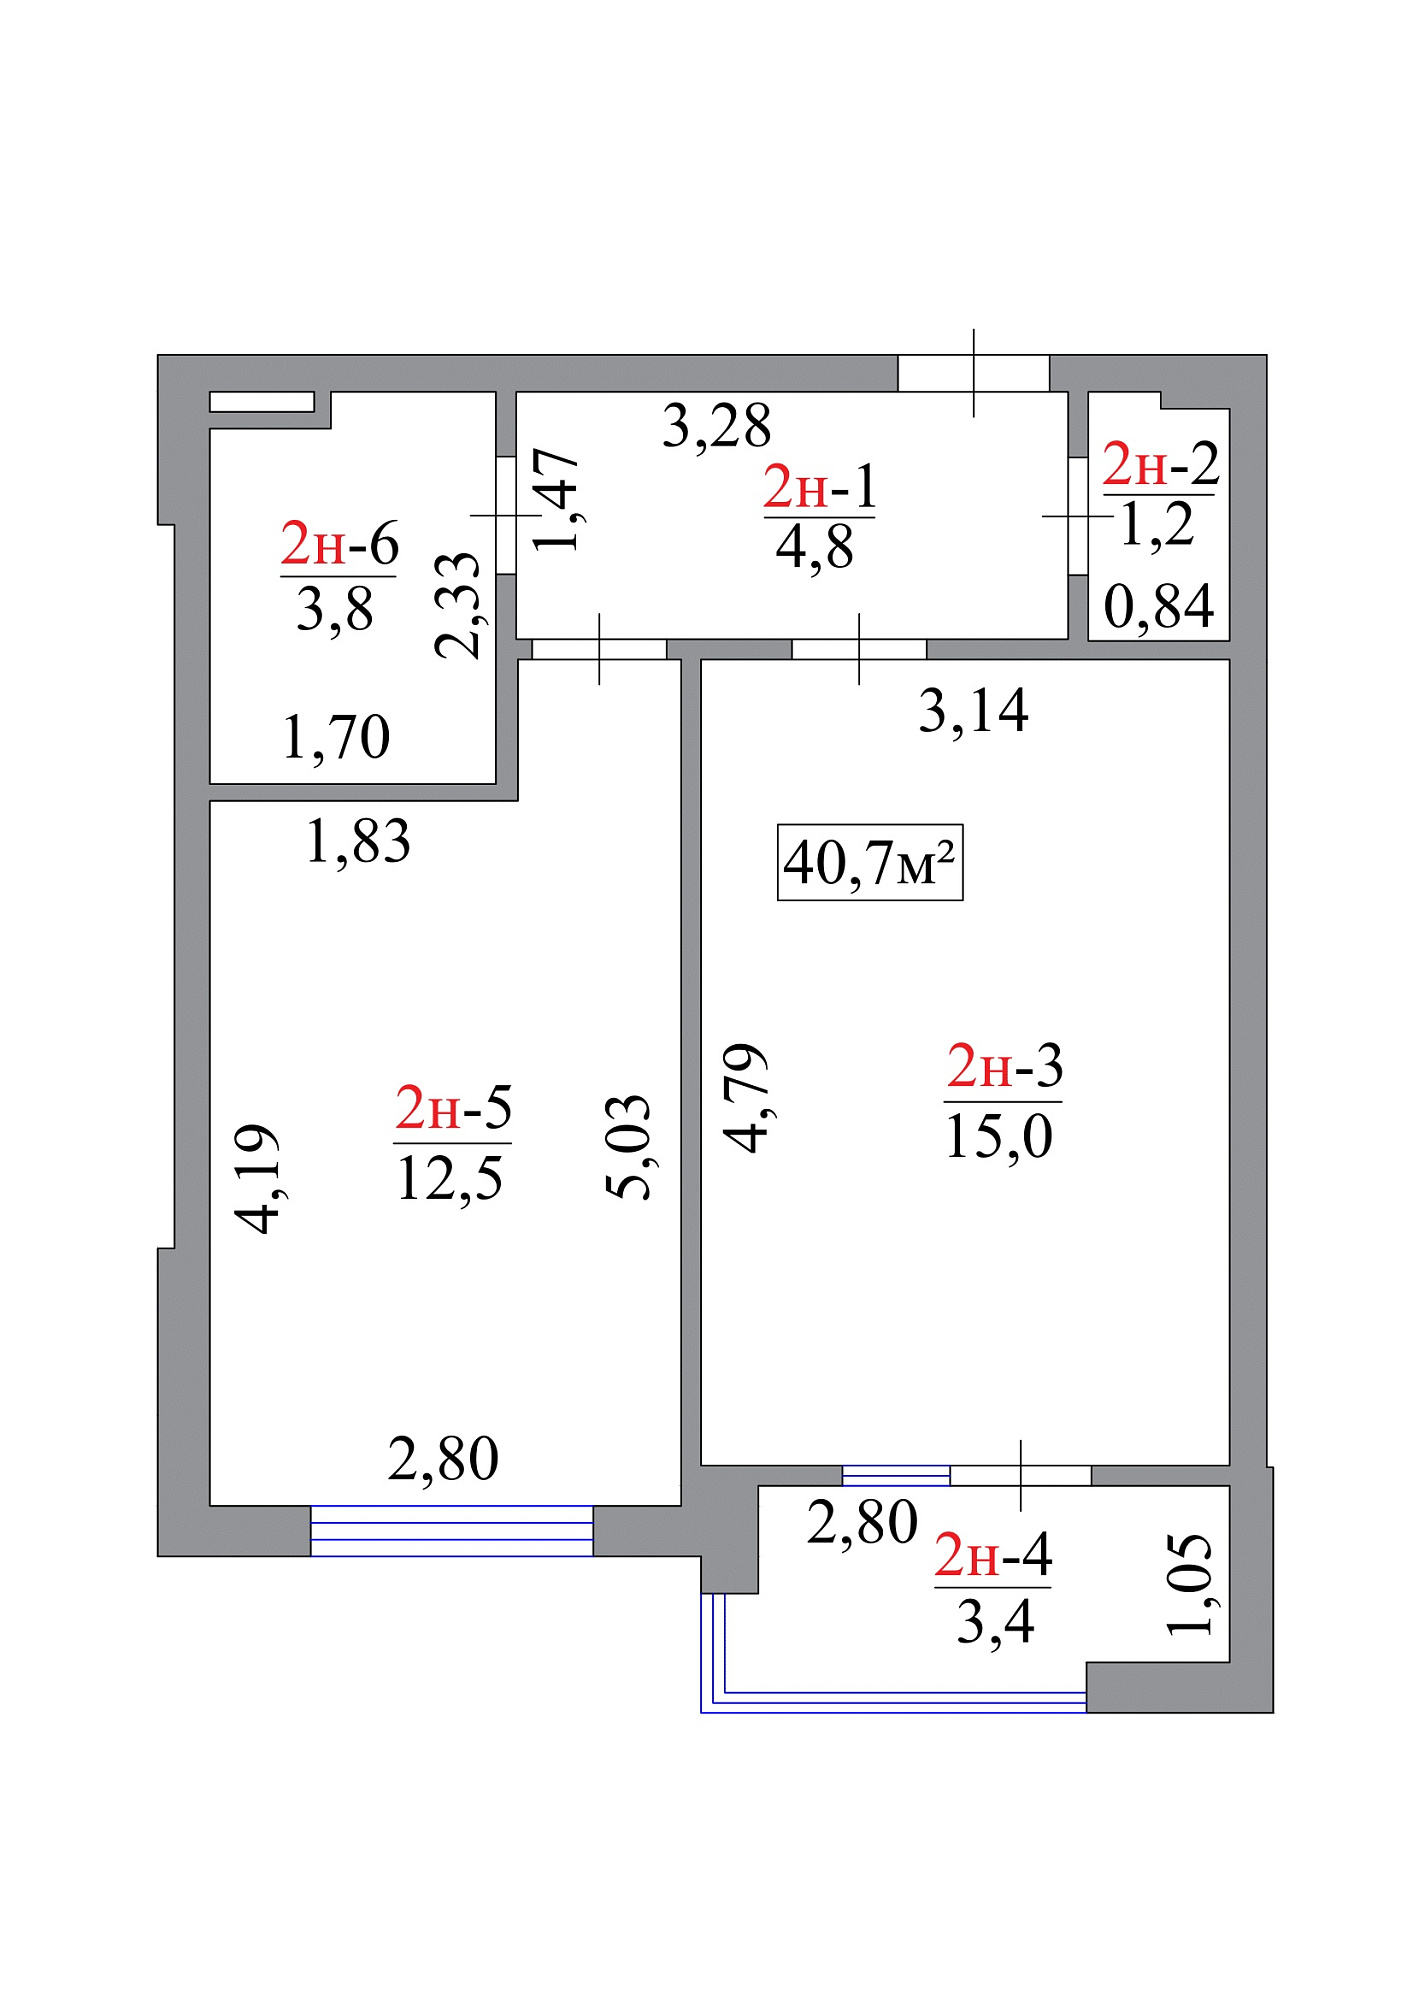 Planning 1-rm flats area 40.7m2, AB-07-01/00002.